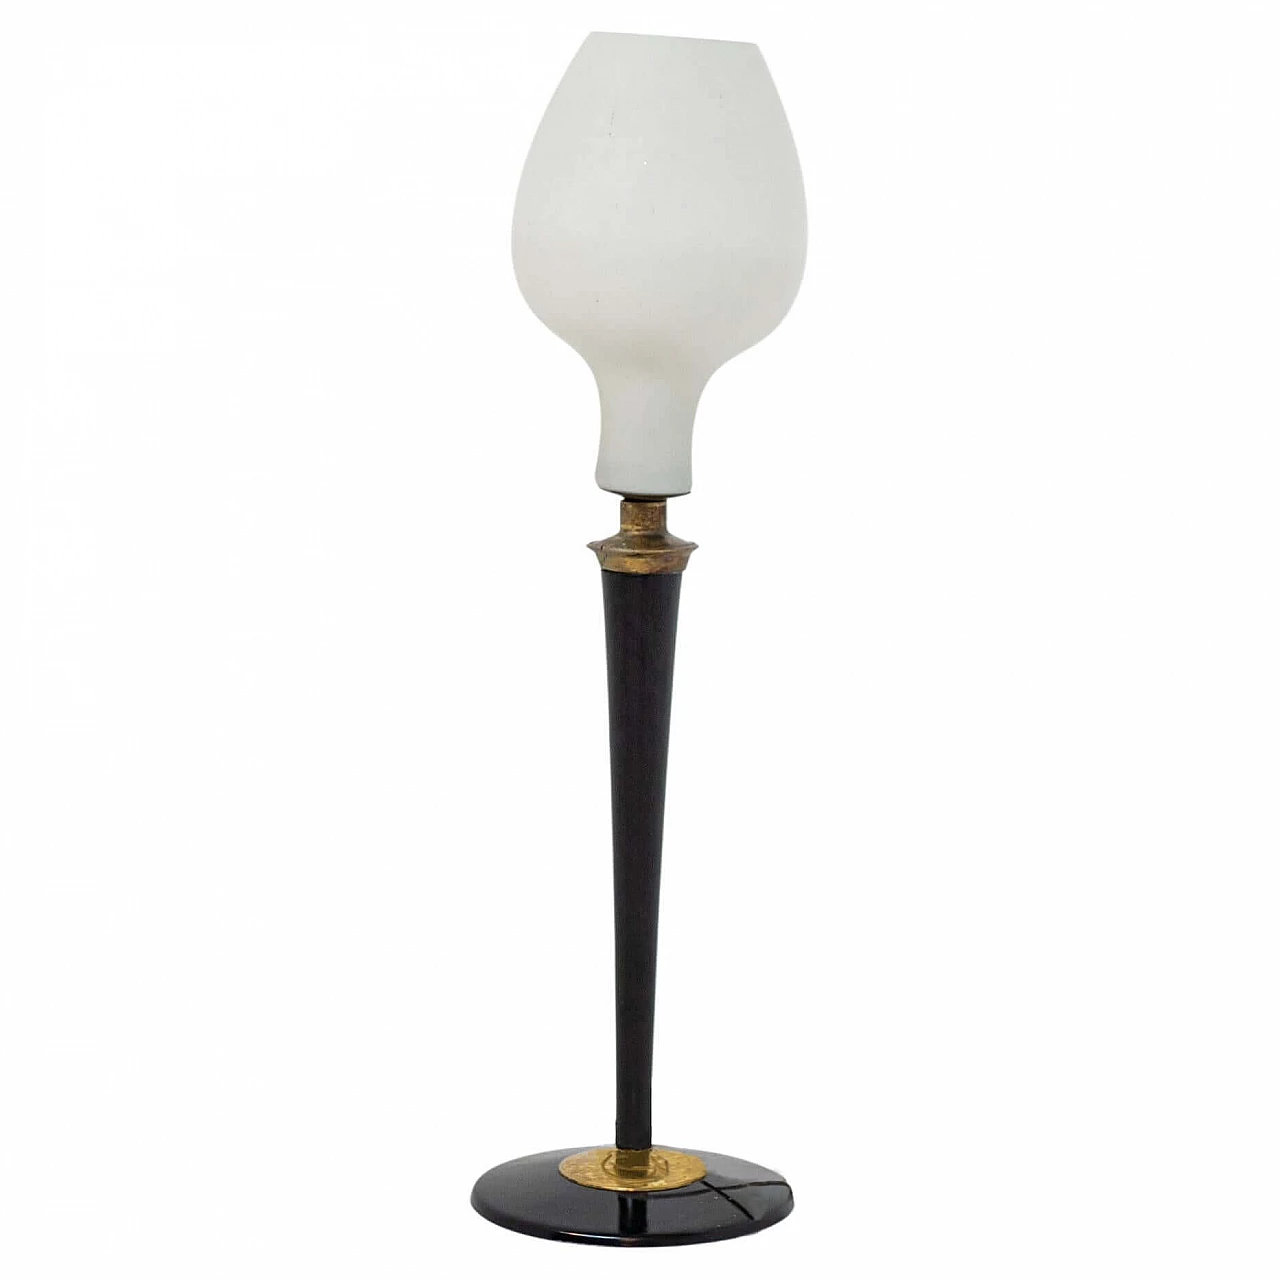 Opal glass table lamp with wood and brass frame, 1950s 1400572